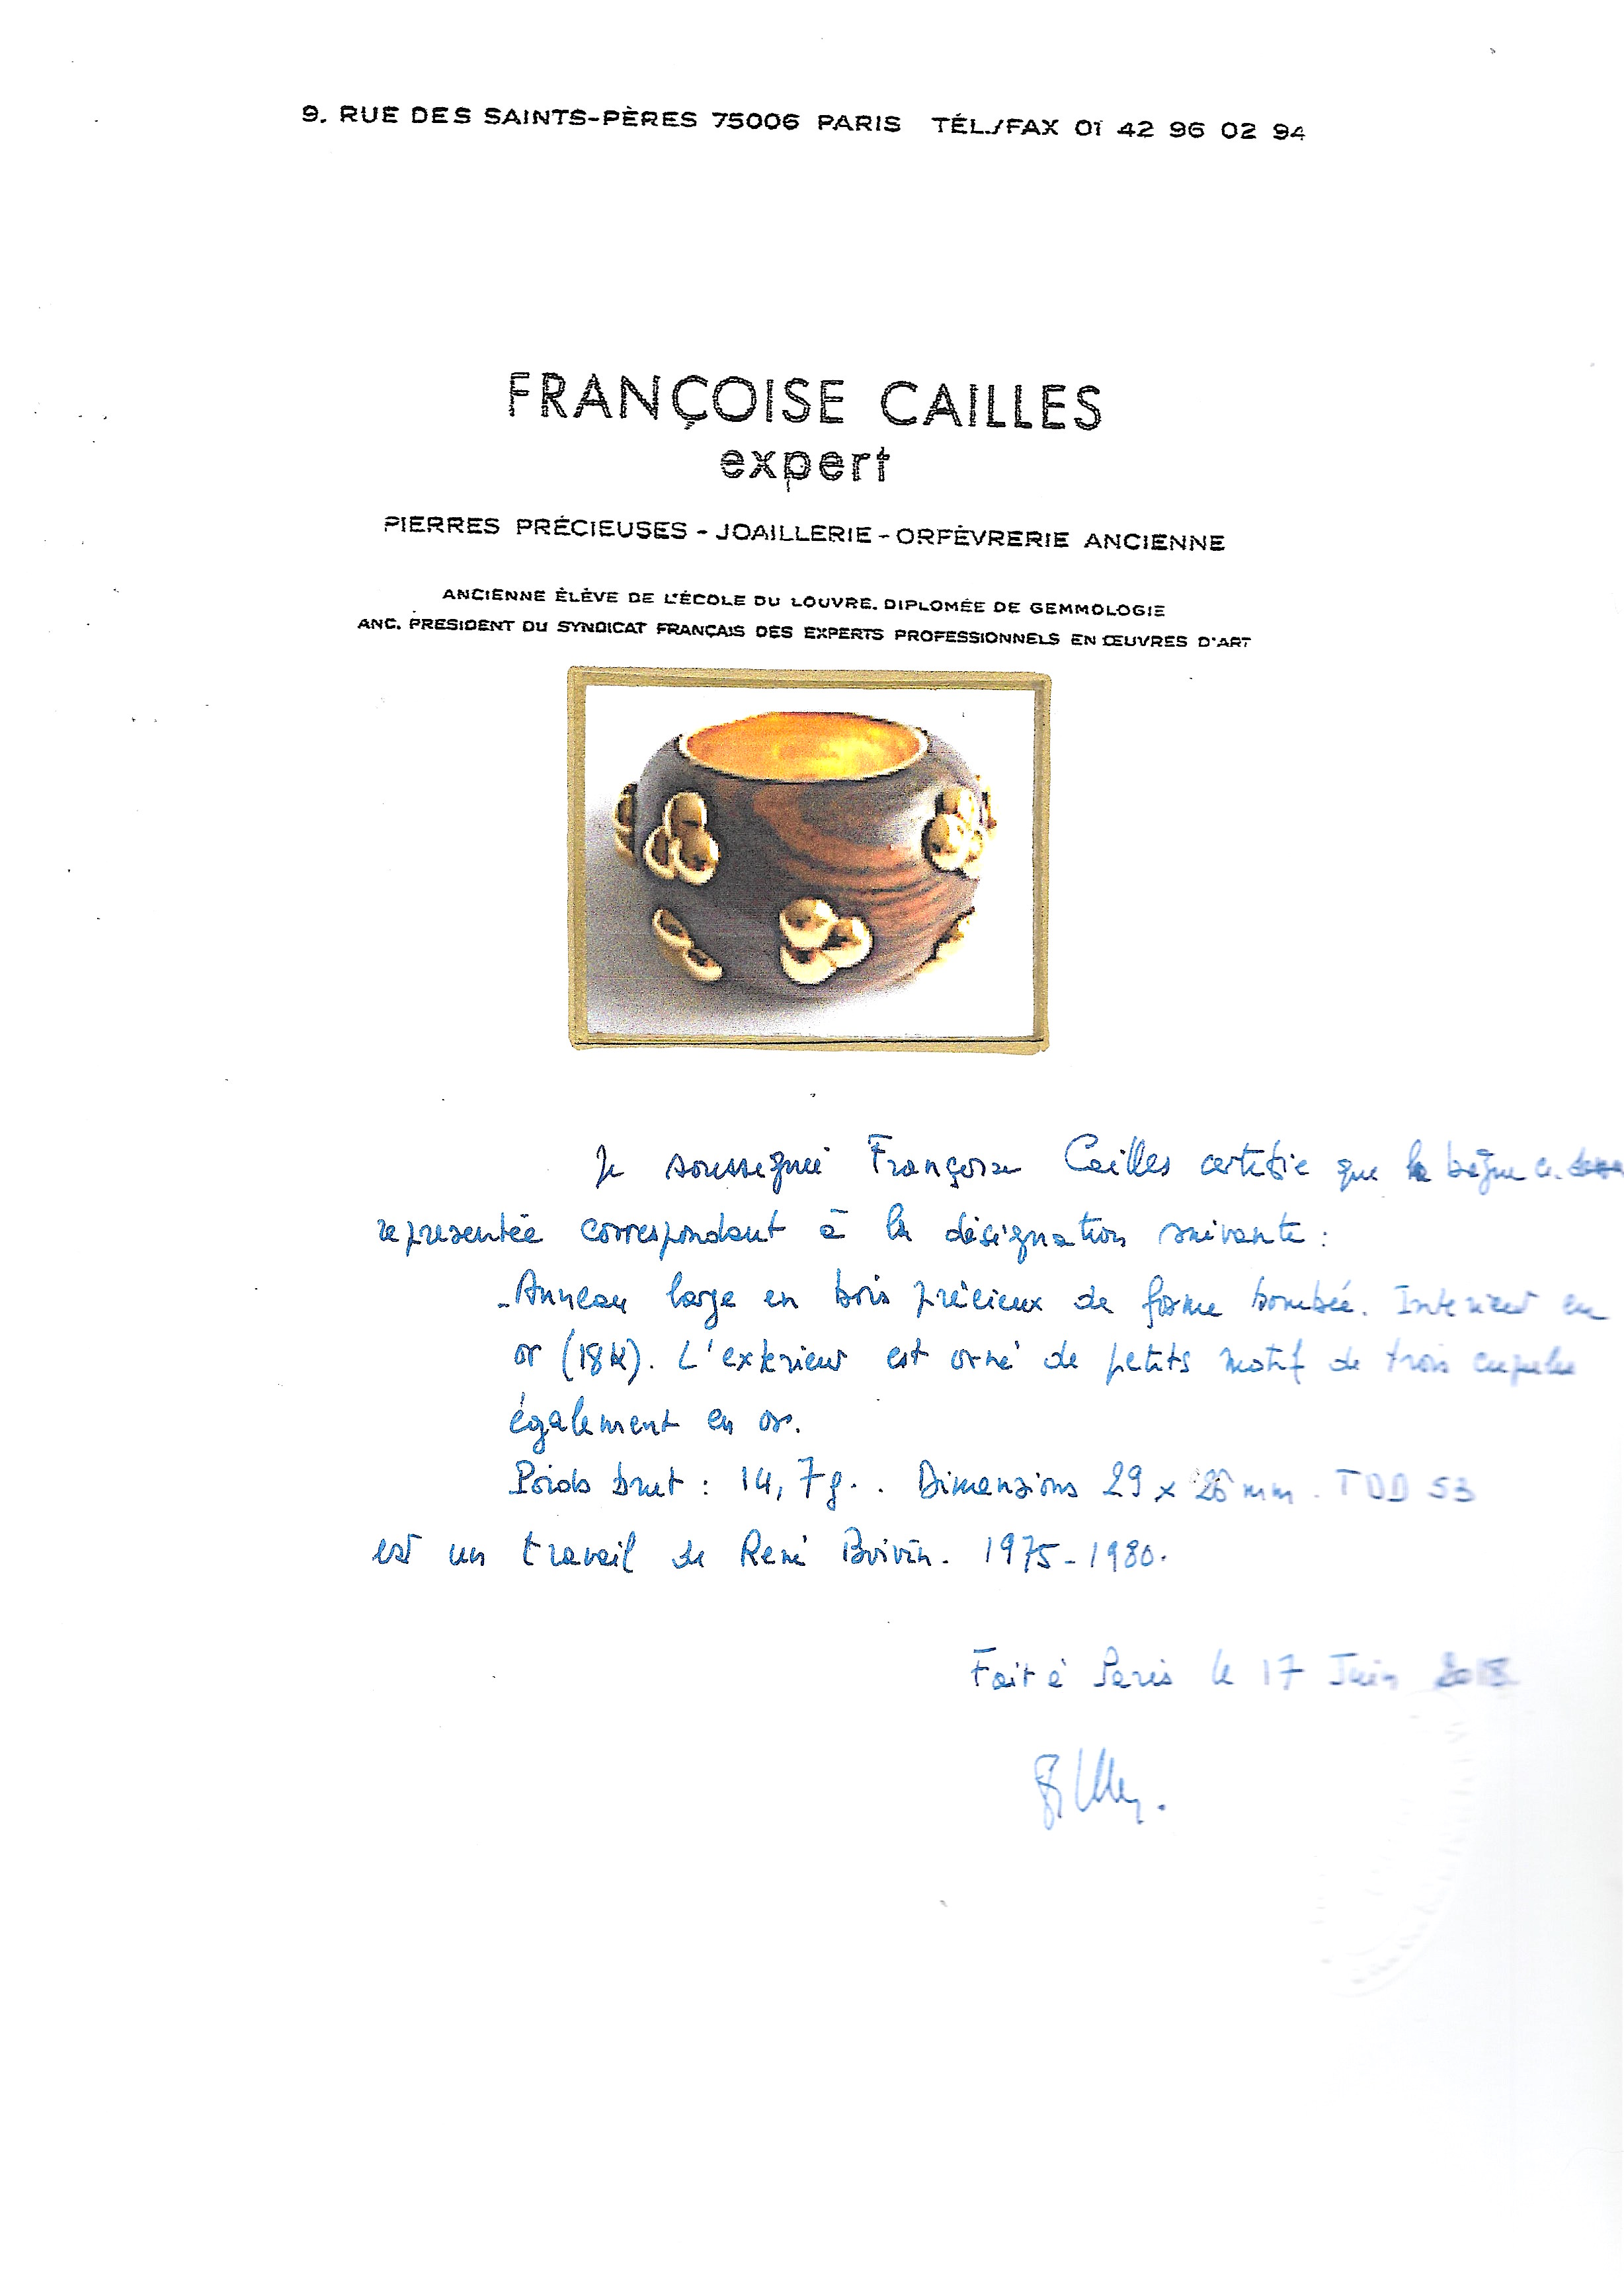 Boivin ring (F. Cailles certificate)-3